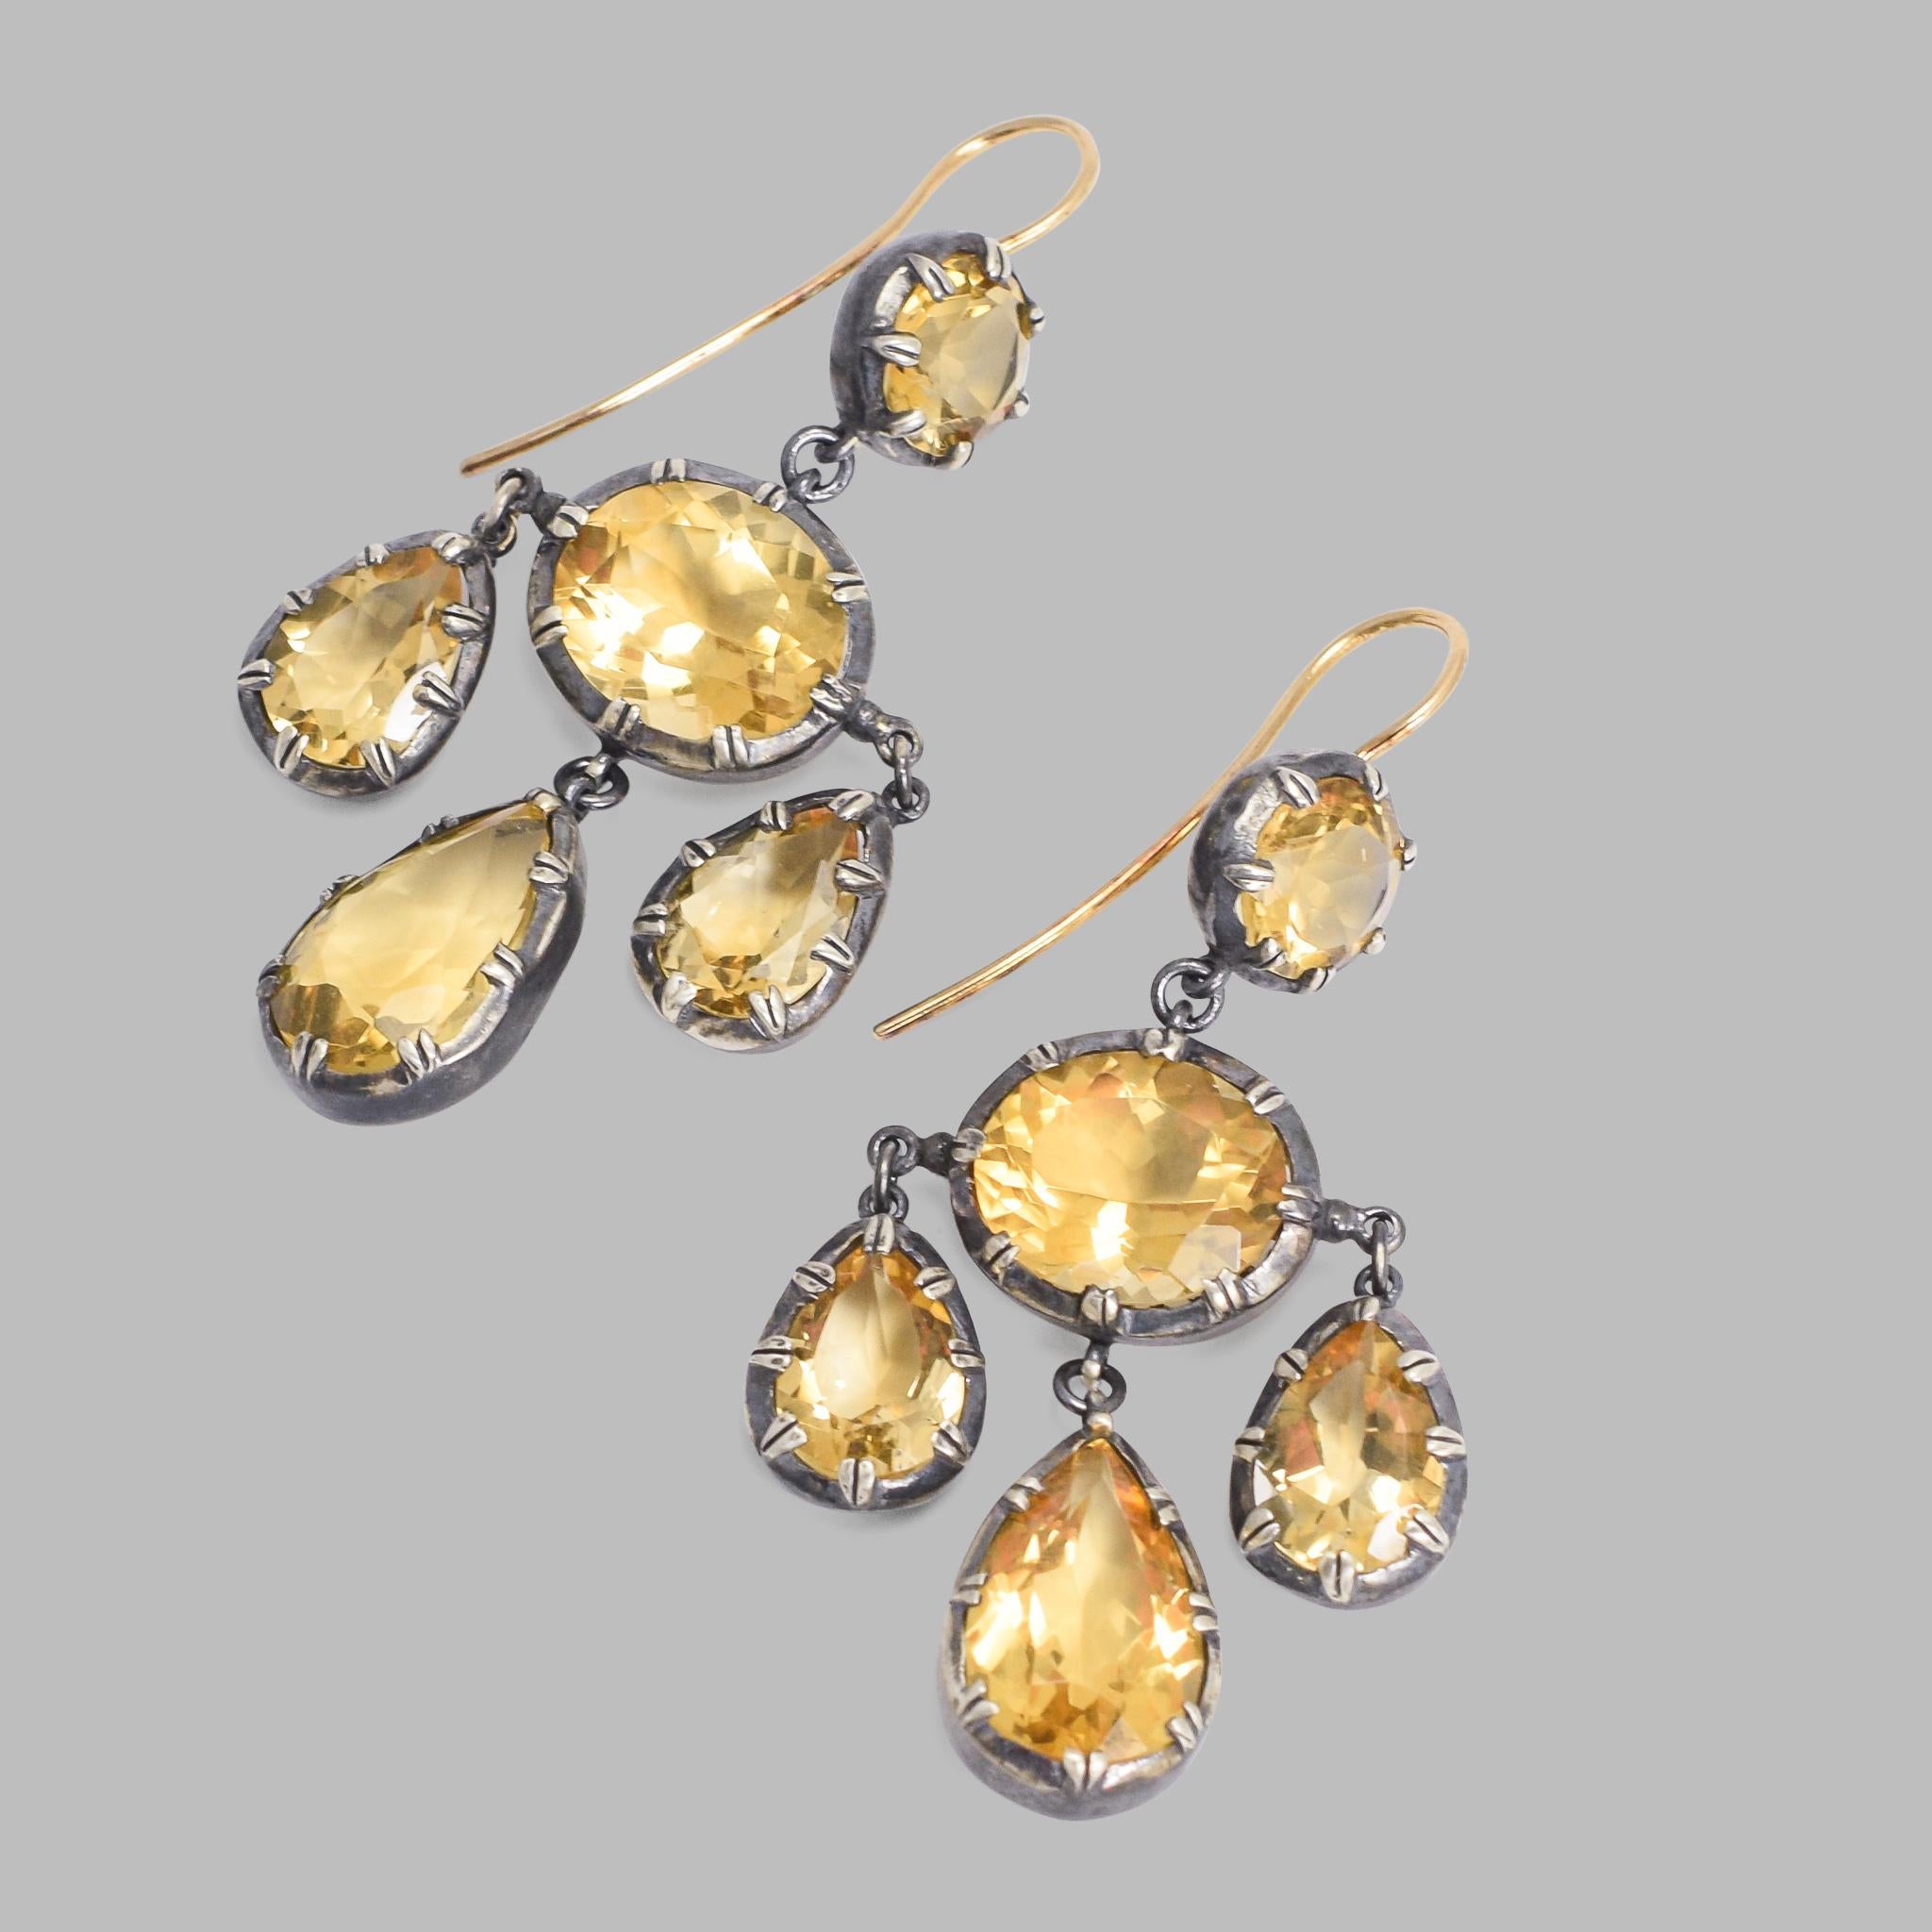 BL Bespoke Collection

Prized for millennia, Citrine seems to channel the sun's energy. It's known as the 'money stone' for its ability to bring abundance and success in all areas. 

A wonderful pair of pendeloque earrings crafted in the 18th